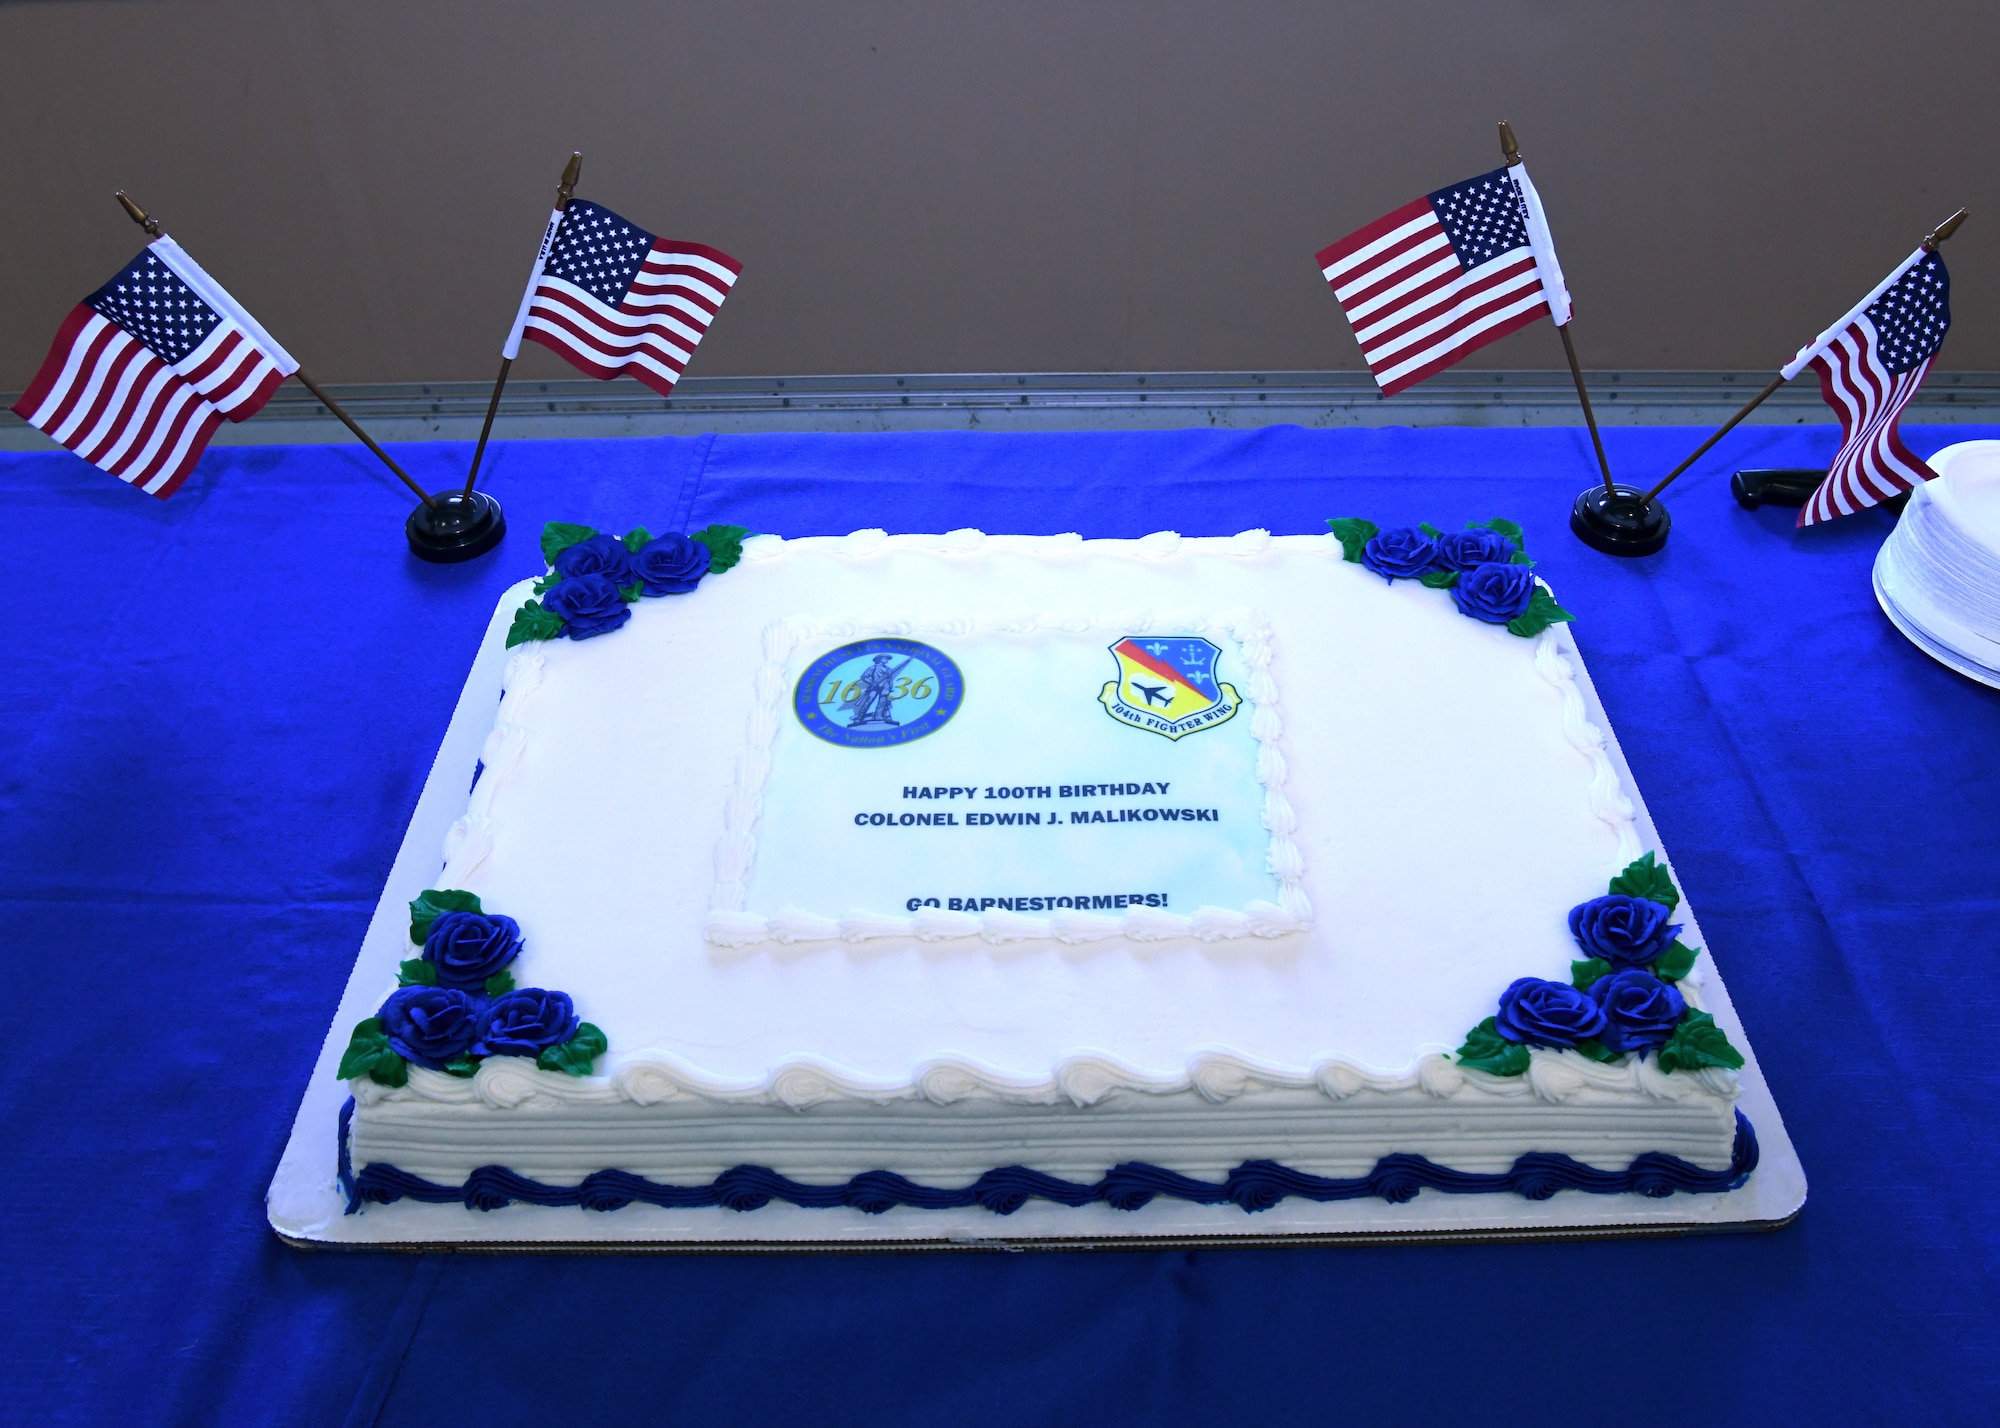 The 104th Fighter Wing threw a suprise birthday for retired Col. Edwin J. Malikowski on November 25, 2019. Malikowski turns 100 years old on November 29, 2019 and spent 39 years in service  through the Army and Air National Guard. His combat record includes service in Northern France, Ardennes- Alsace, Germany and Central Europe. (U.S. Air National Guard Photo by Airman Camille Lienau)